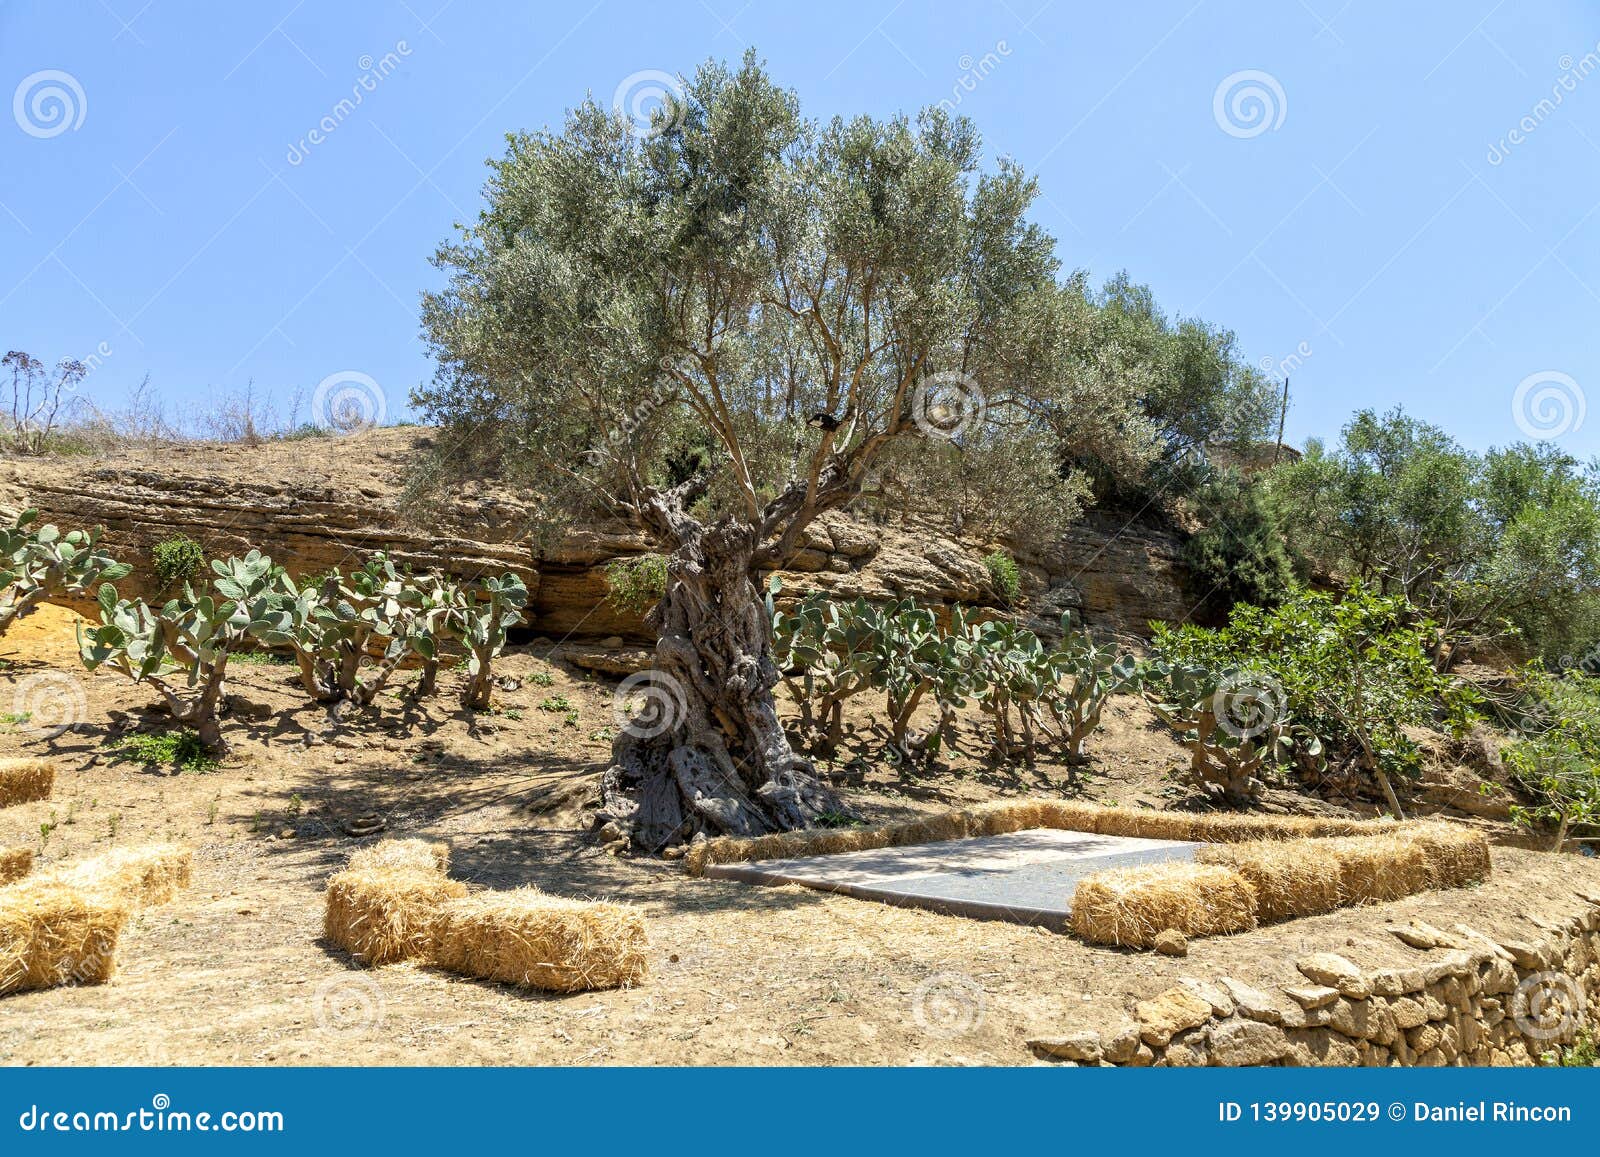 Olive Tree And Cactus In Kolymbetra Garden In The Valley Of The